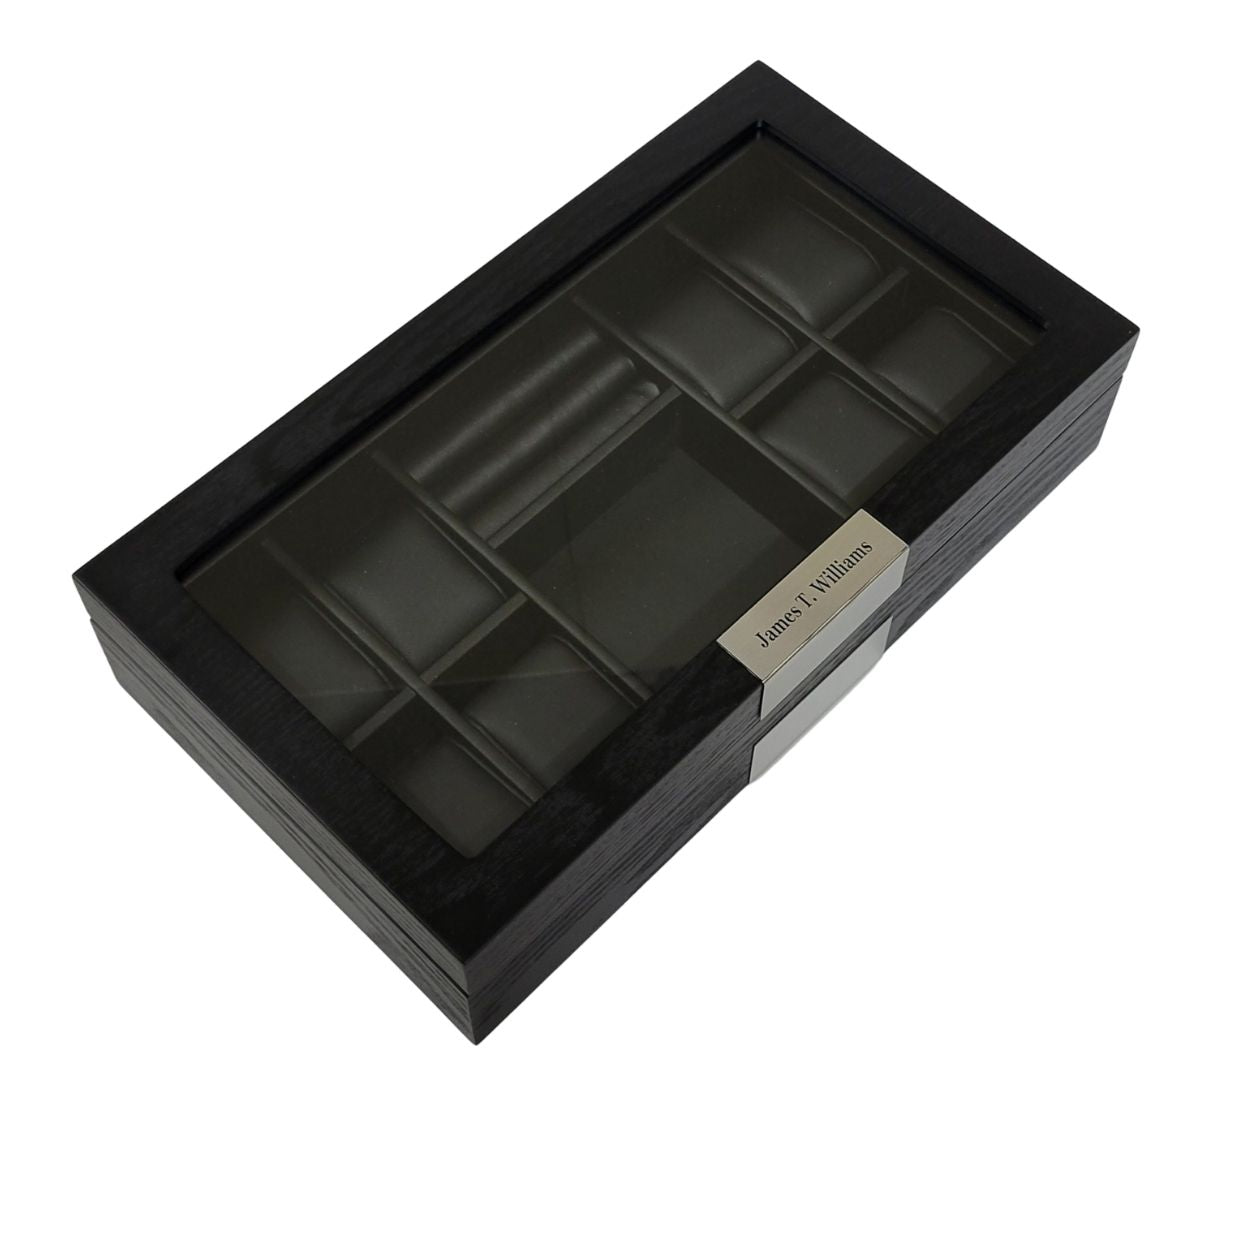 Men's Watch Box Storage Box for 8 Watches with Drawer